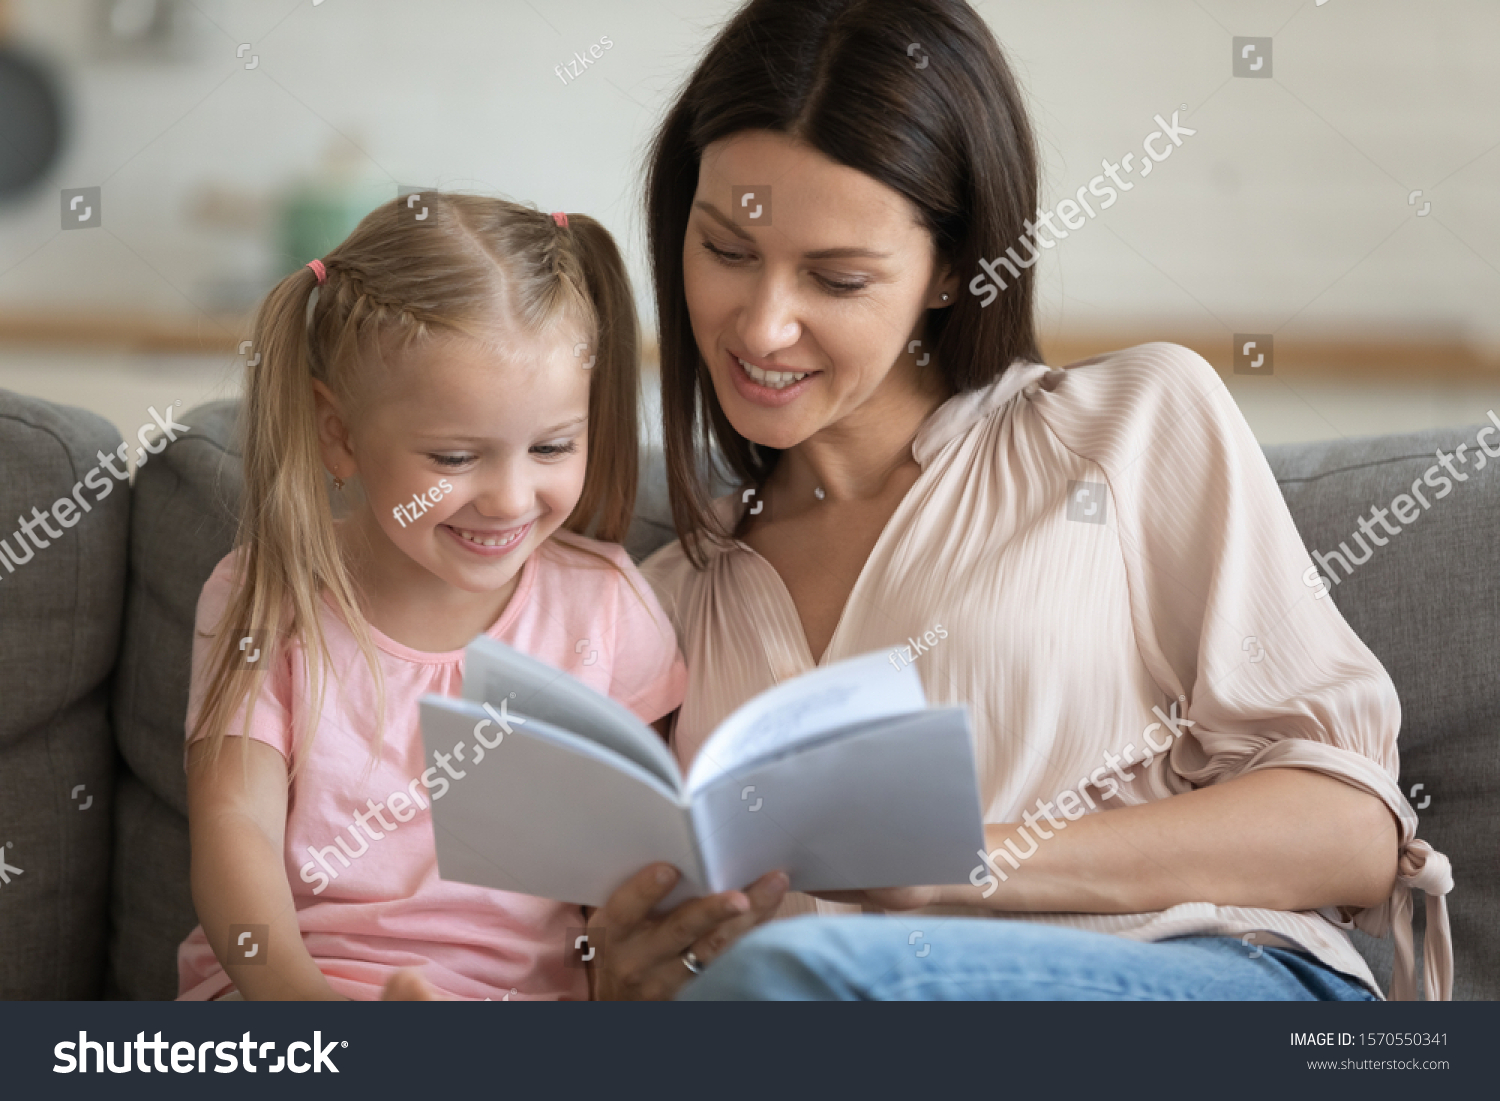 Caring single parent young adult mother and happy cute little preschool child daughter reading book learning education fairy tale story bonding enjoying family lifestyle hobby at home sit on sofa #1570550341